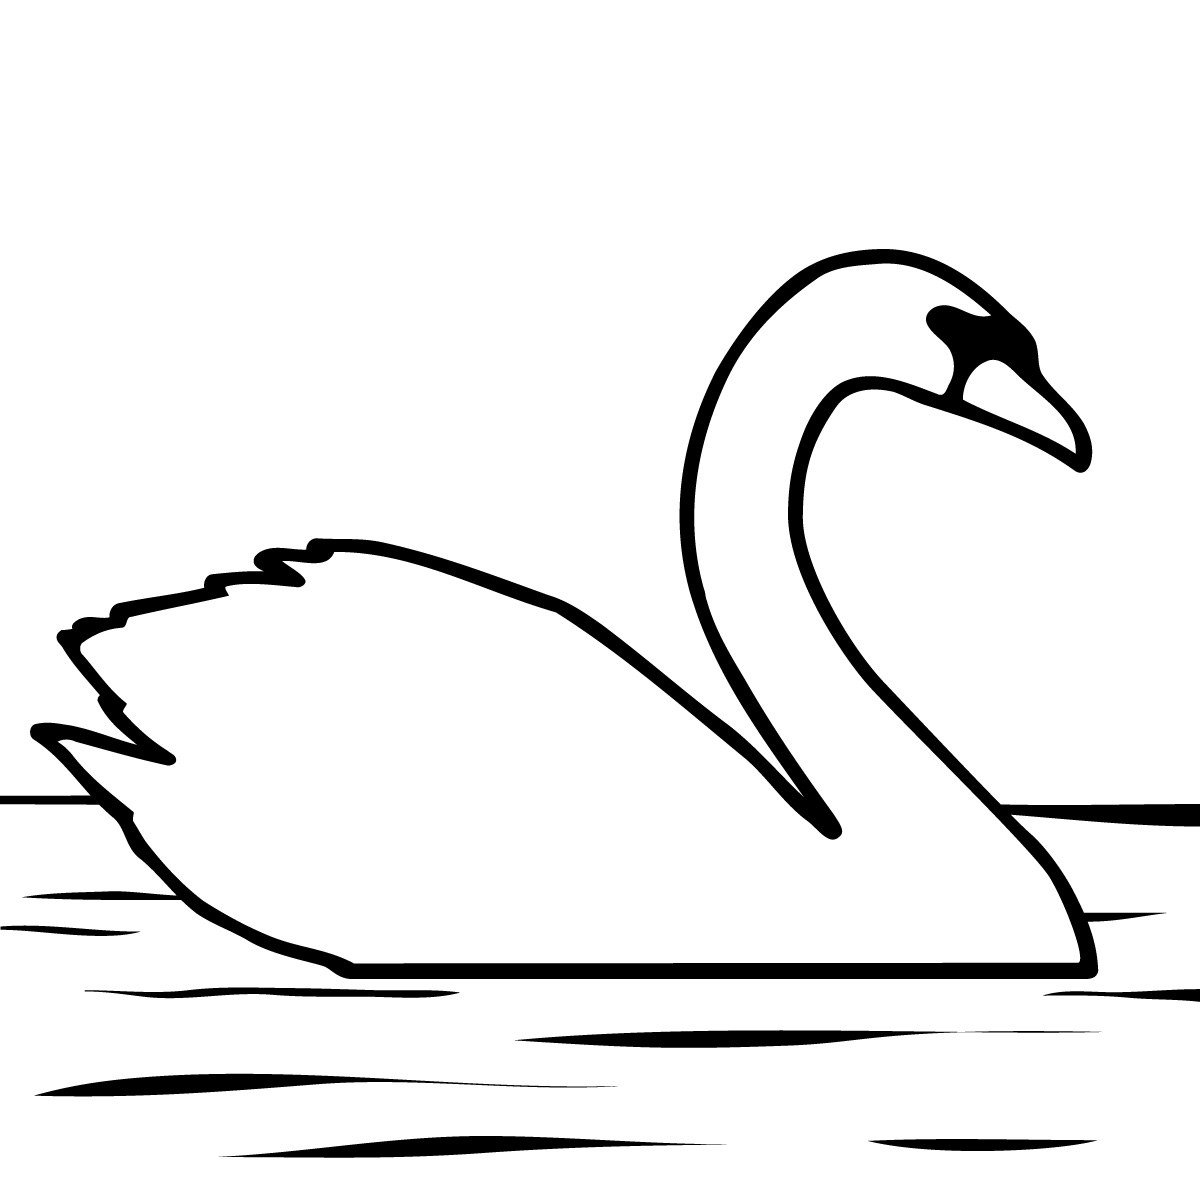 Clip art black and white swan clipart 2